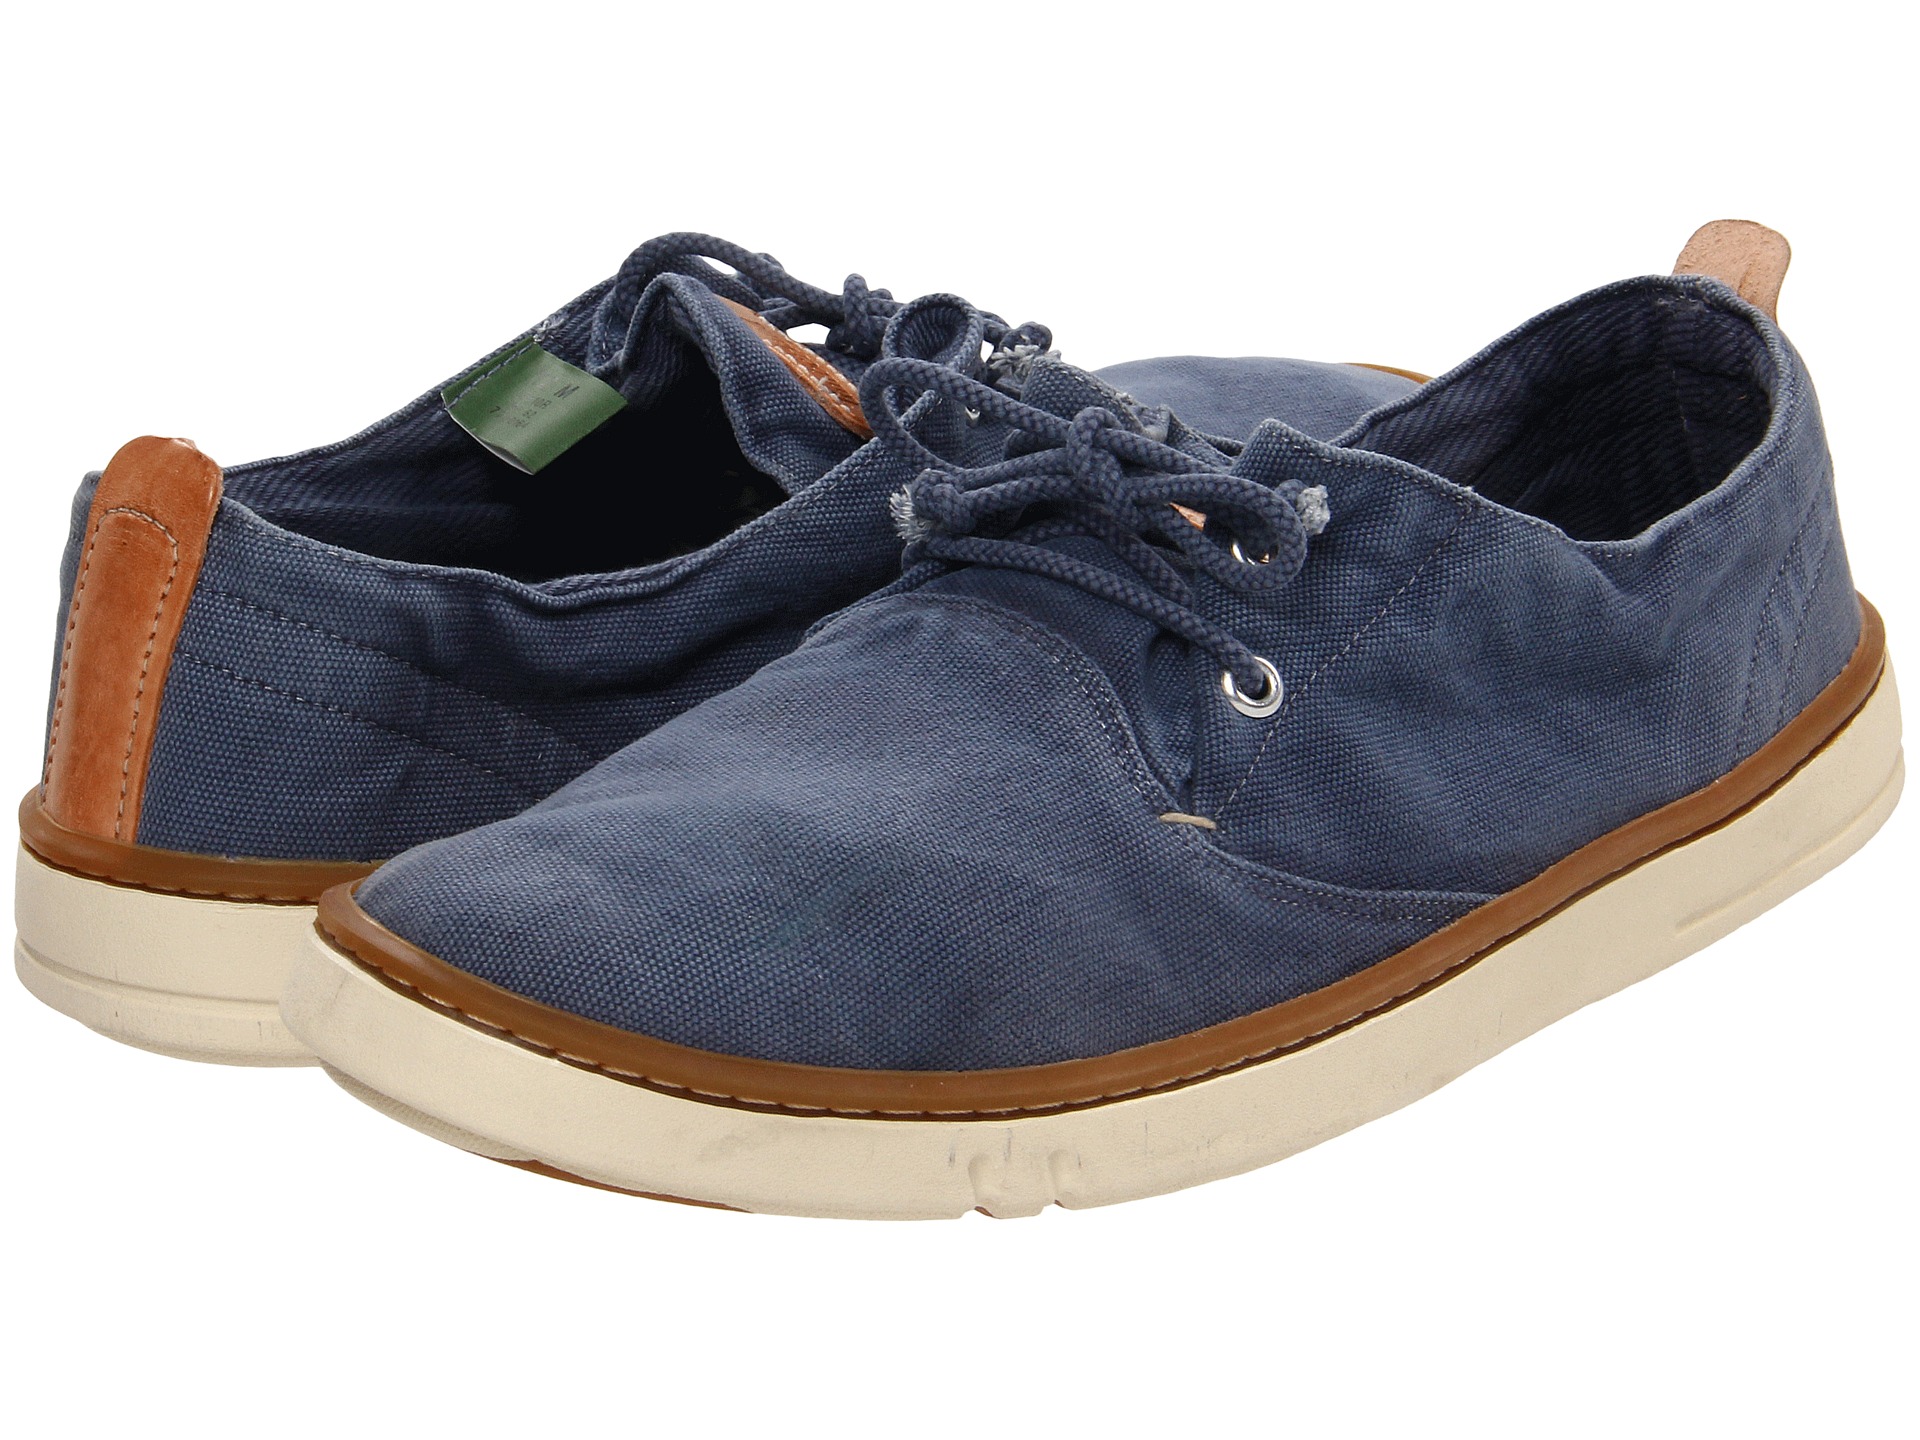 Timberland Earthkeepers® Hookset Oxford Blue Canvas - Zappos.com Free ...